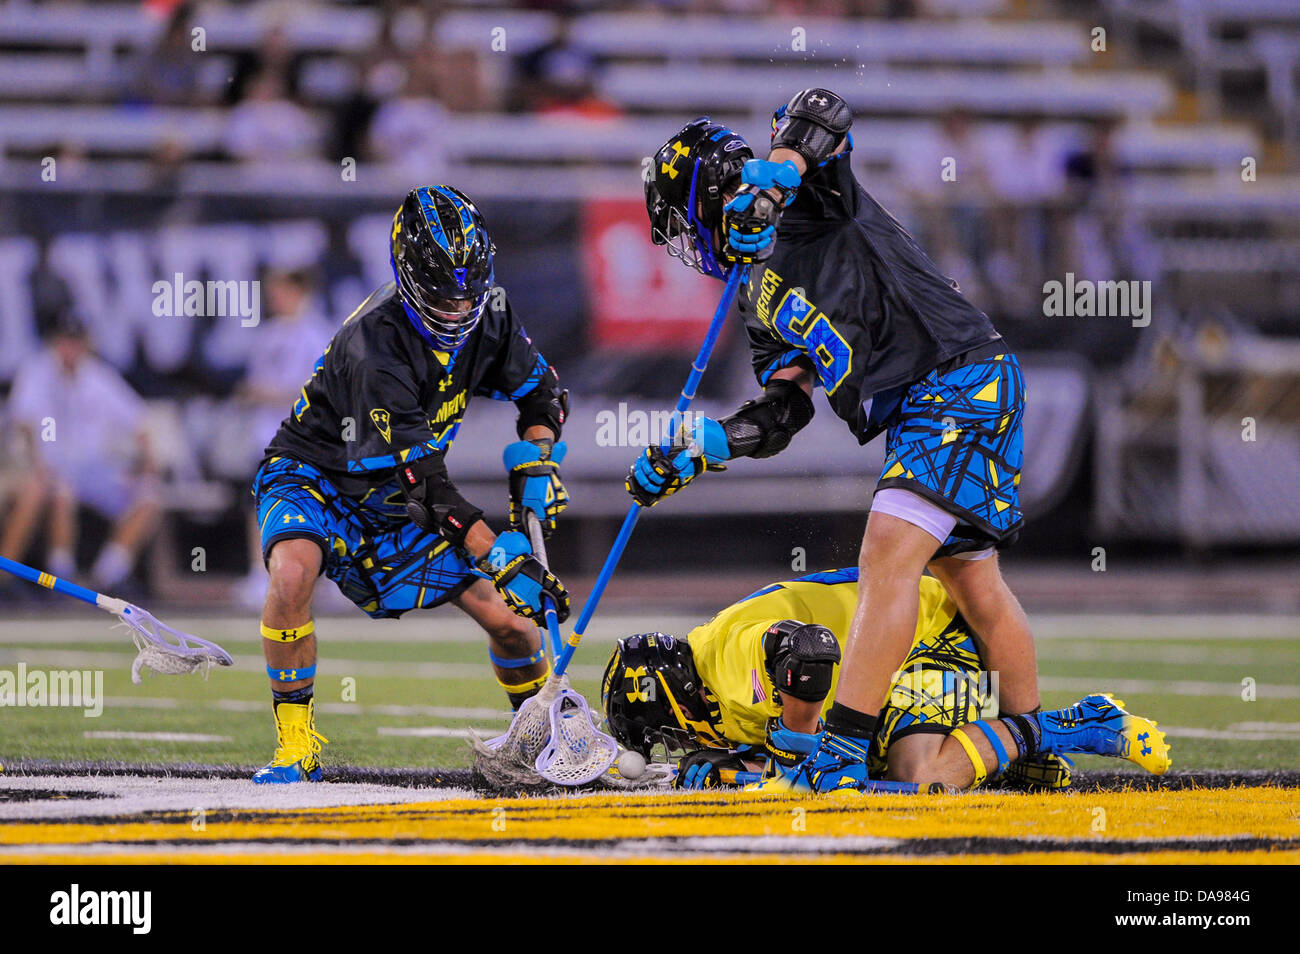 July 6, 2013 - Baltimore, MD, United States of America - July 6, 2013 Baltimore, MD.Several North All-Star players converge on the ball during the 8th Annual Under Armour All-American Lacrosse Classic at Johnny Unitas Stadium Baltimore on July 6, 2013..South defeats North 28-24. Stock Photo